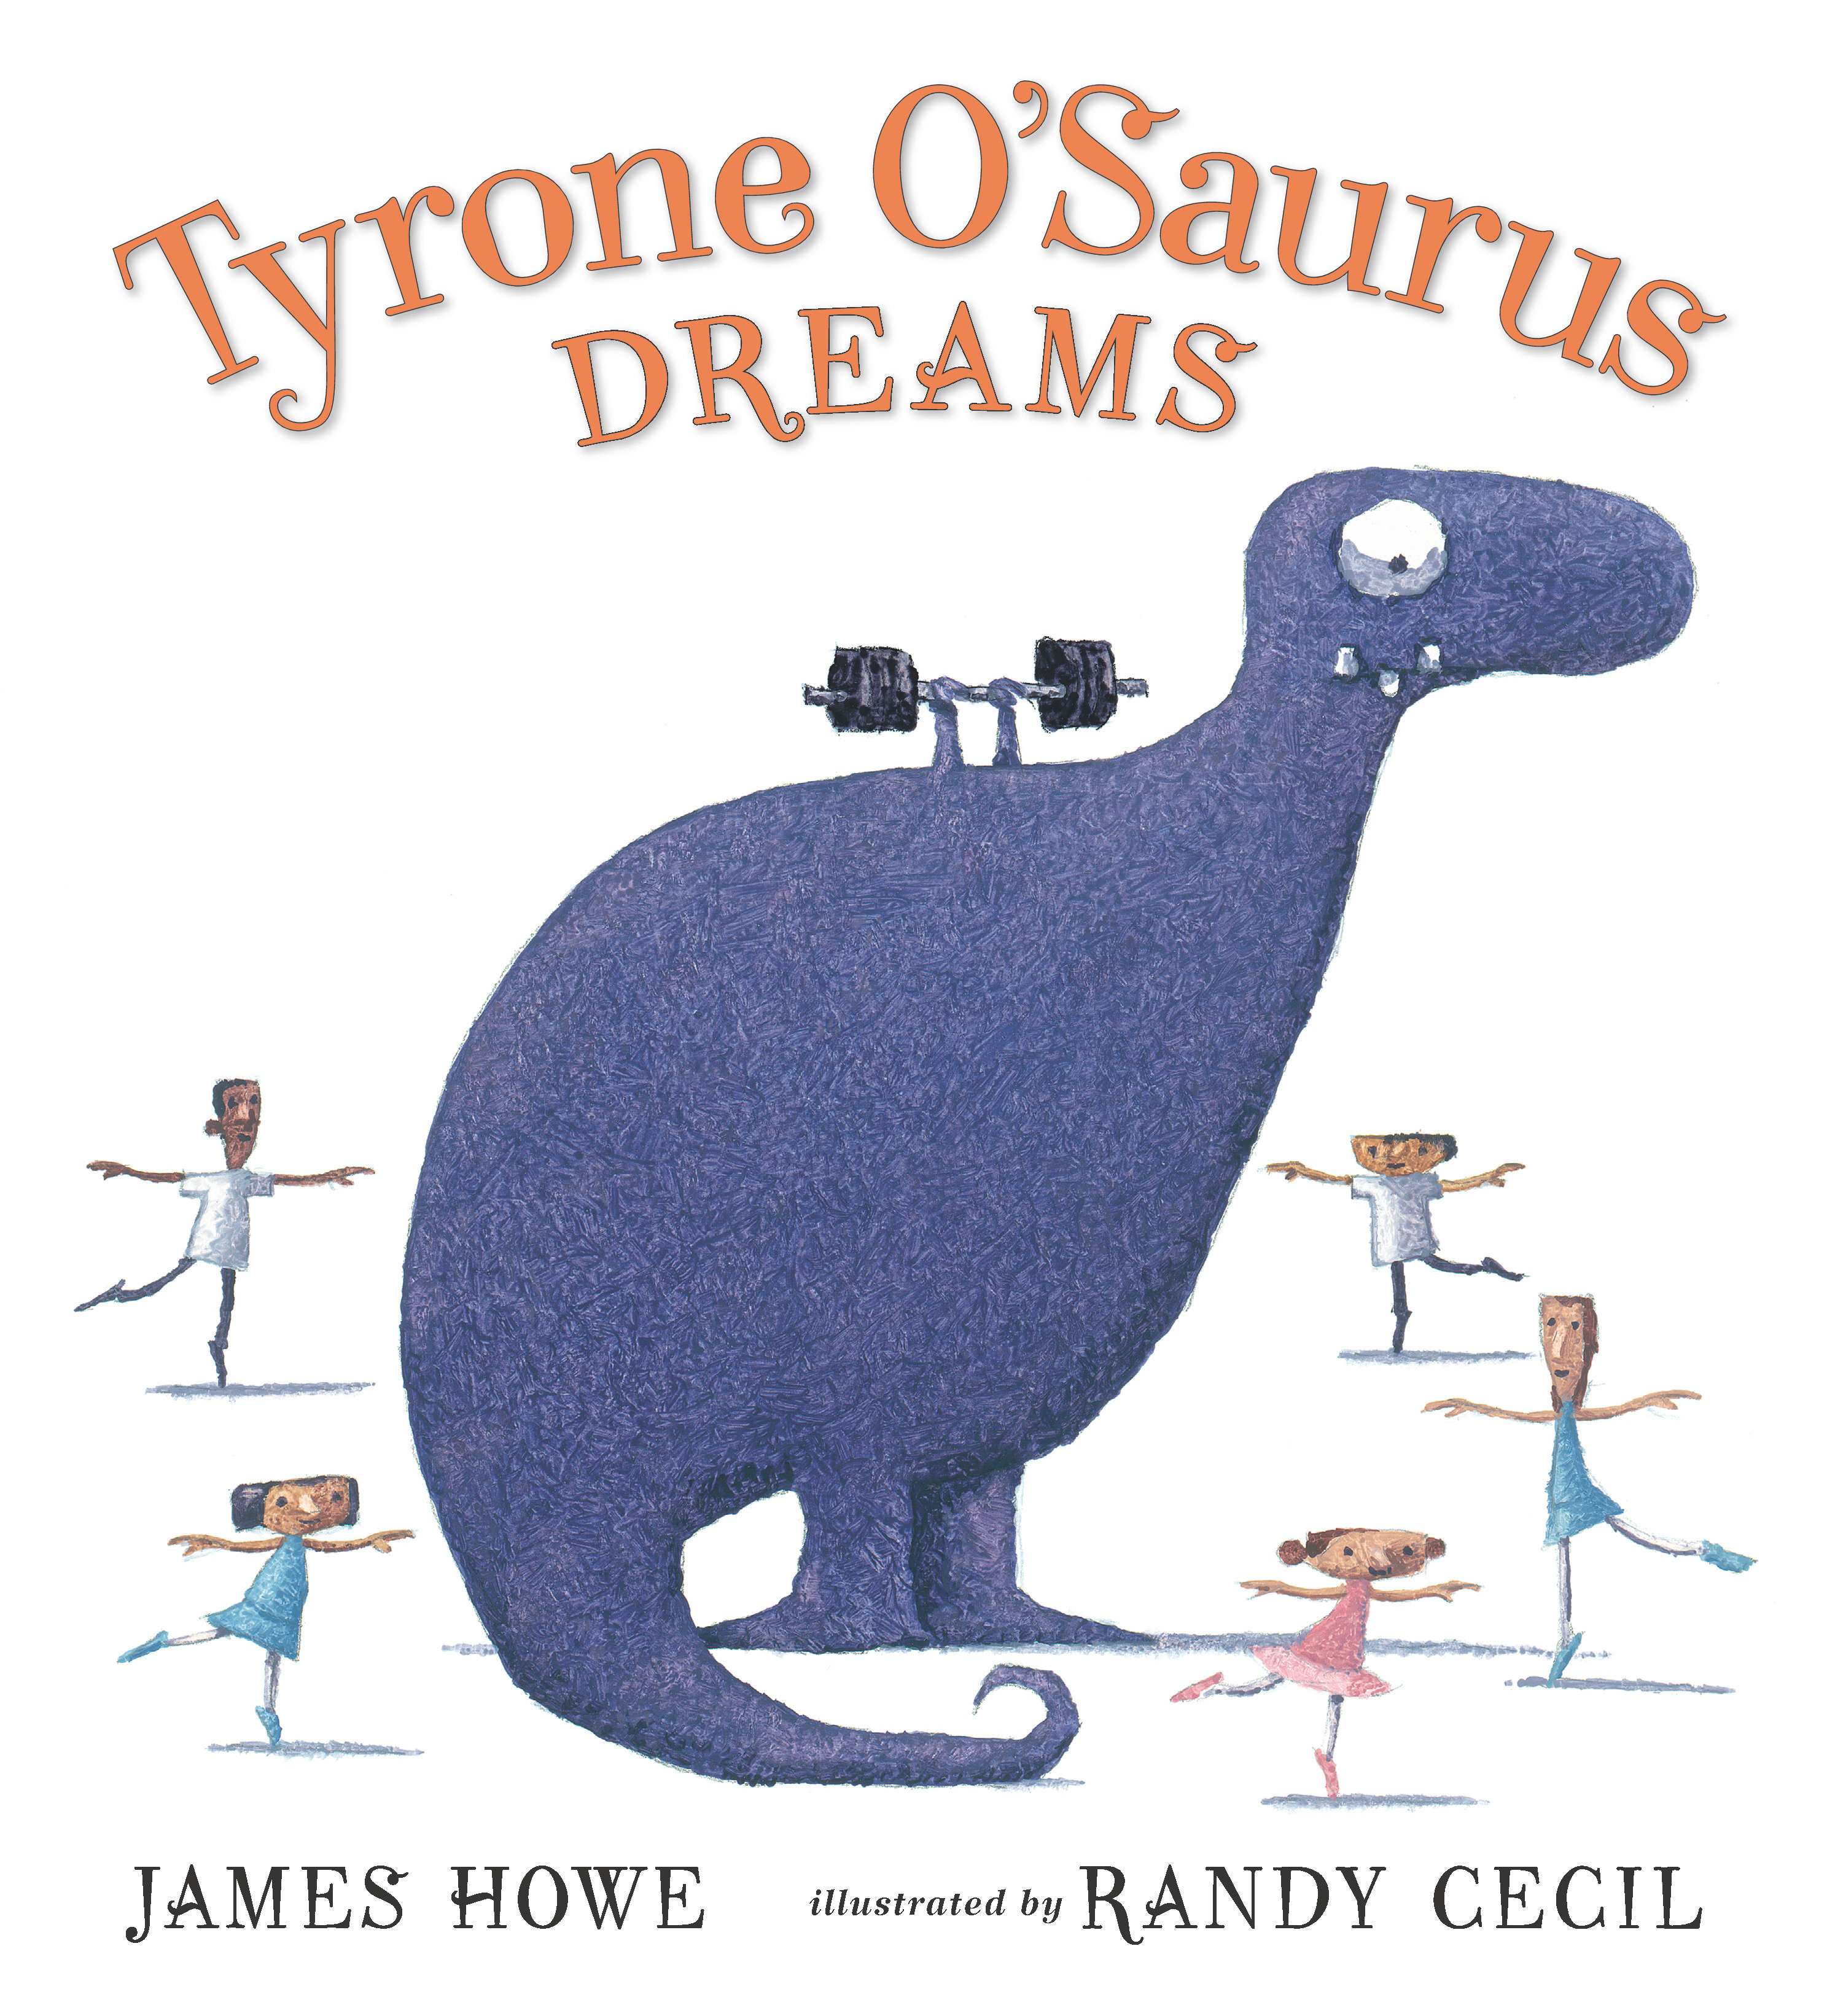 Tyrone O'saurus Dreams By James Howe Illustrated By Randy Cecil